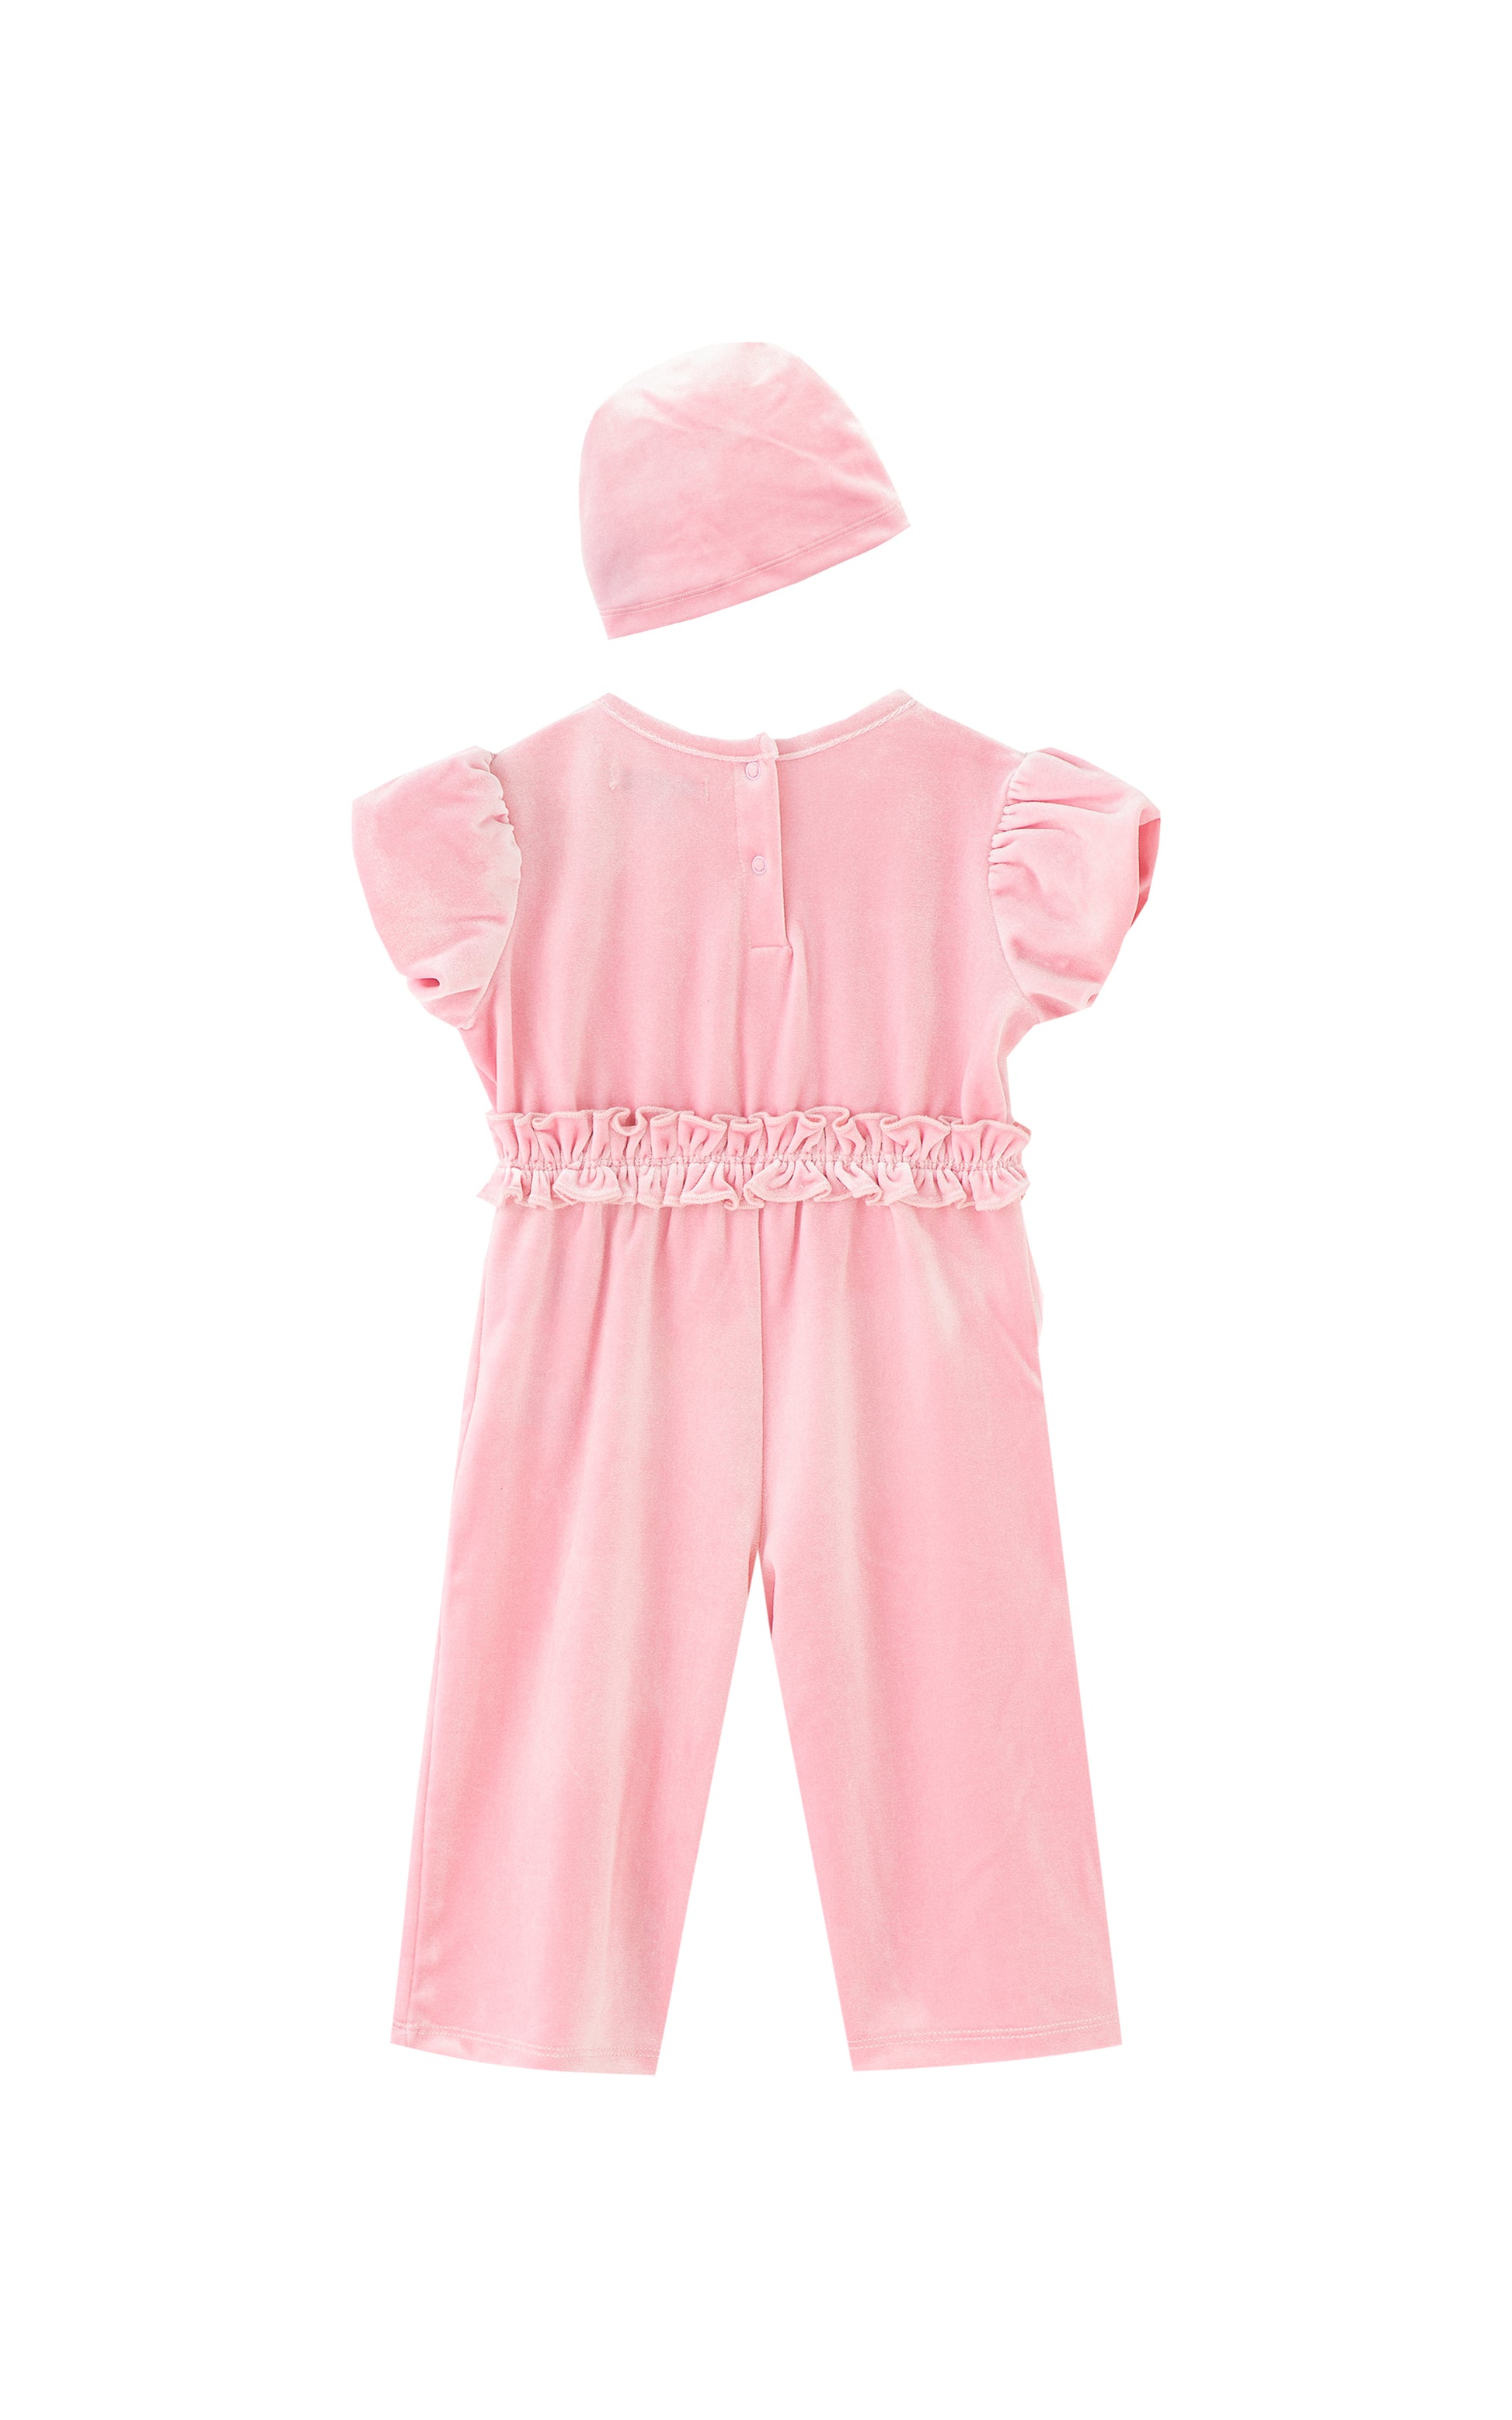 BACK OF LIGHT PINK VELOUR SHORT-SLEEVE ONESIE JUMPSUIT AND MATCHING HAT WITH A BOW